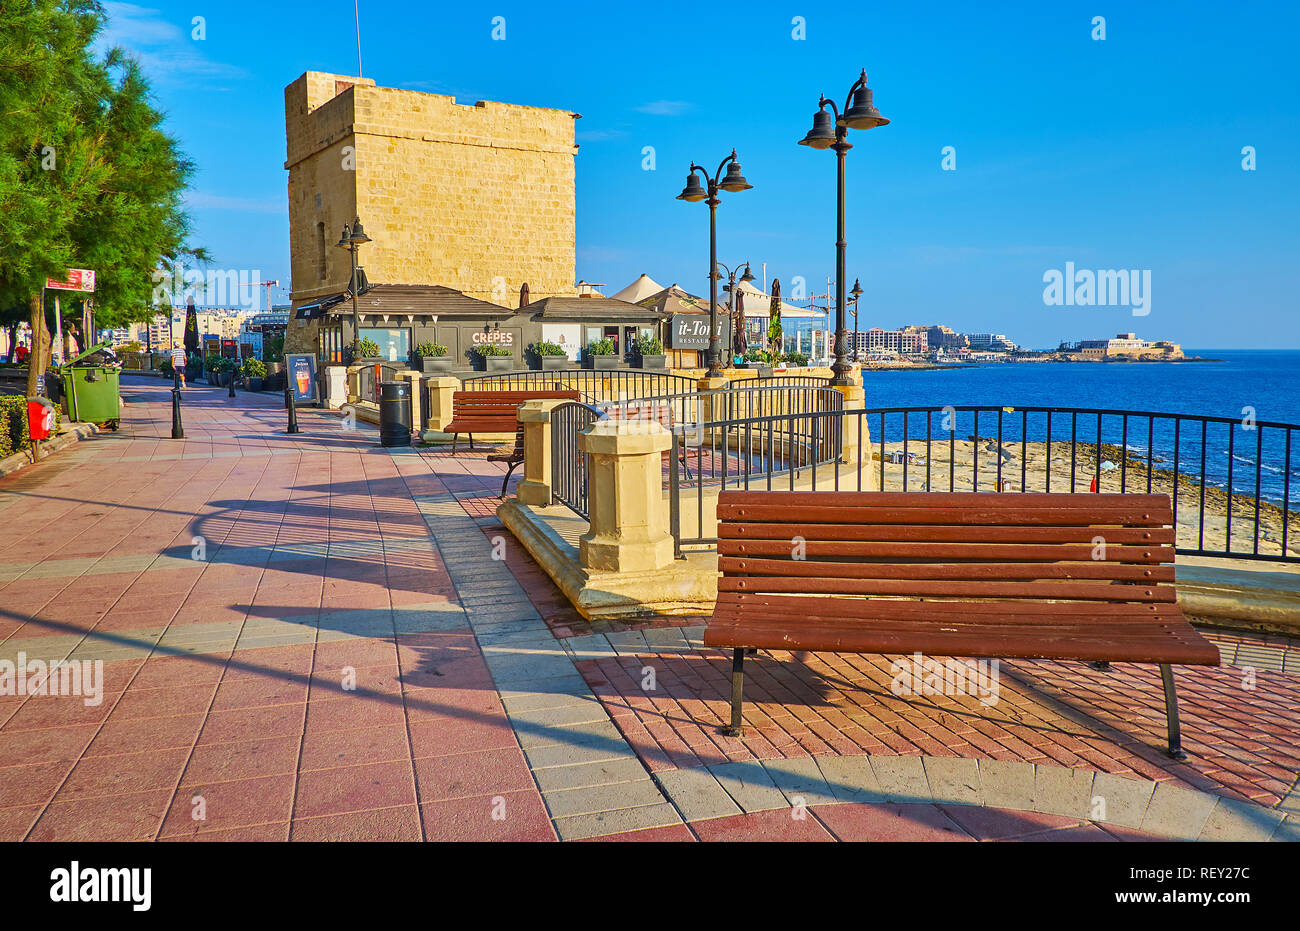 SLIEMA, MALTA - JUNE 20, 2018: The St Julian's Tower is located in seaside promenade and surrounded by cafes and recreational zone, on June 20 in Slie Stock Photo